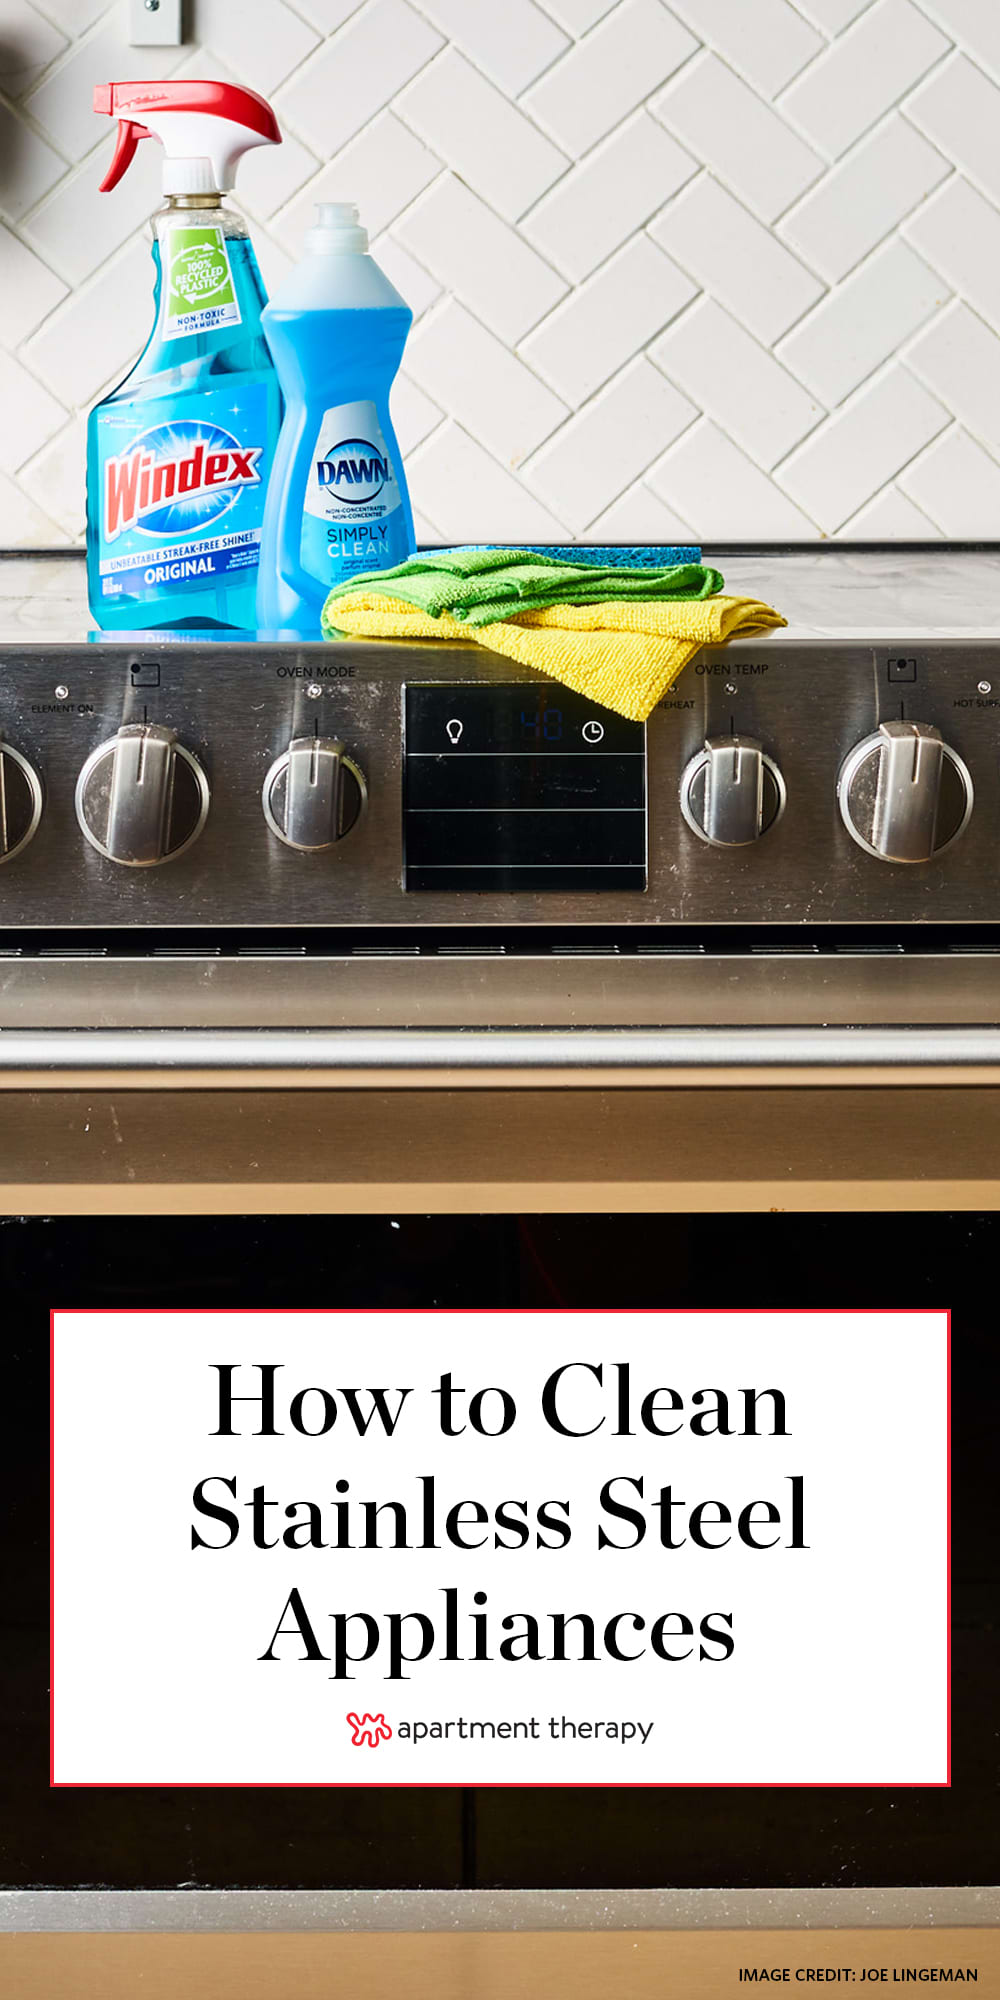 https://cdn.apartmenttherapy.info/image/upload/v1579886638/at/organize-clean/how-to-clean-stainless-steel-appliances.jpg